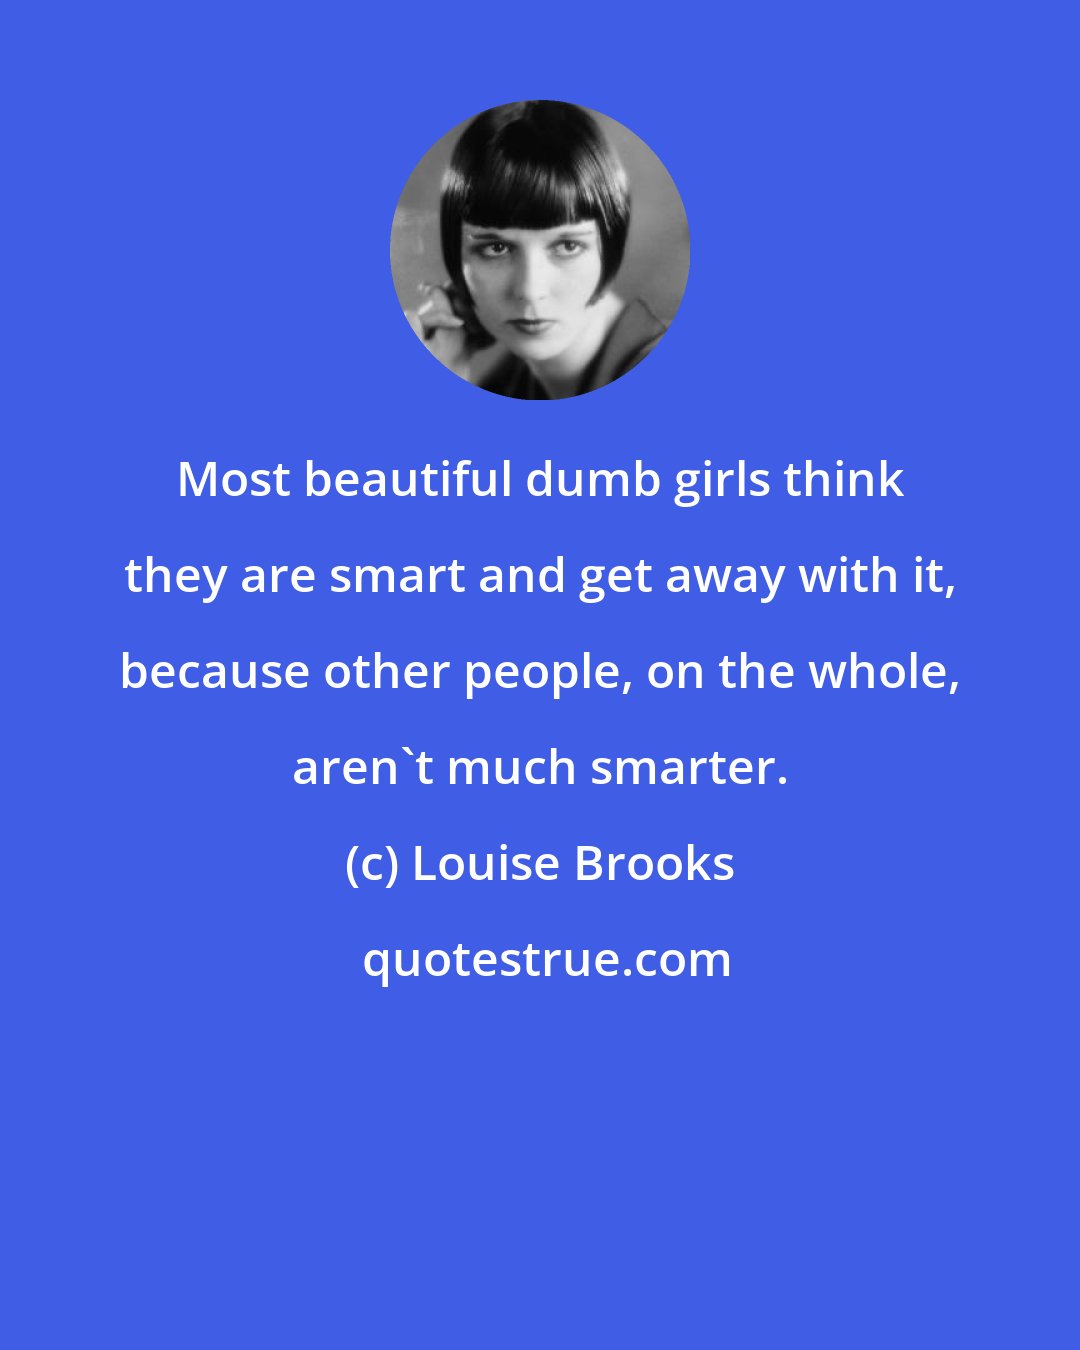 Louise Brooks: Most beautiful dumb girls think they are smart and get away with it, because other people, on the whole, aren't much smarter.